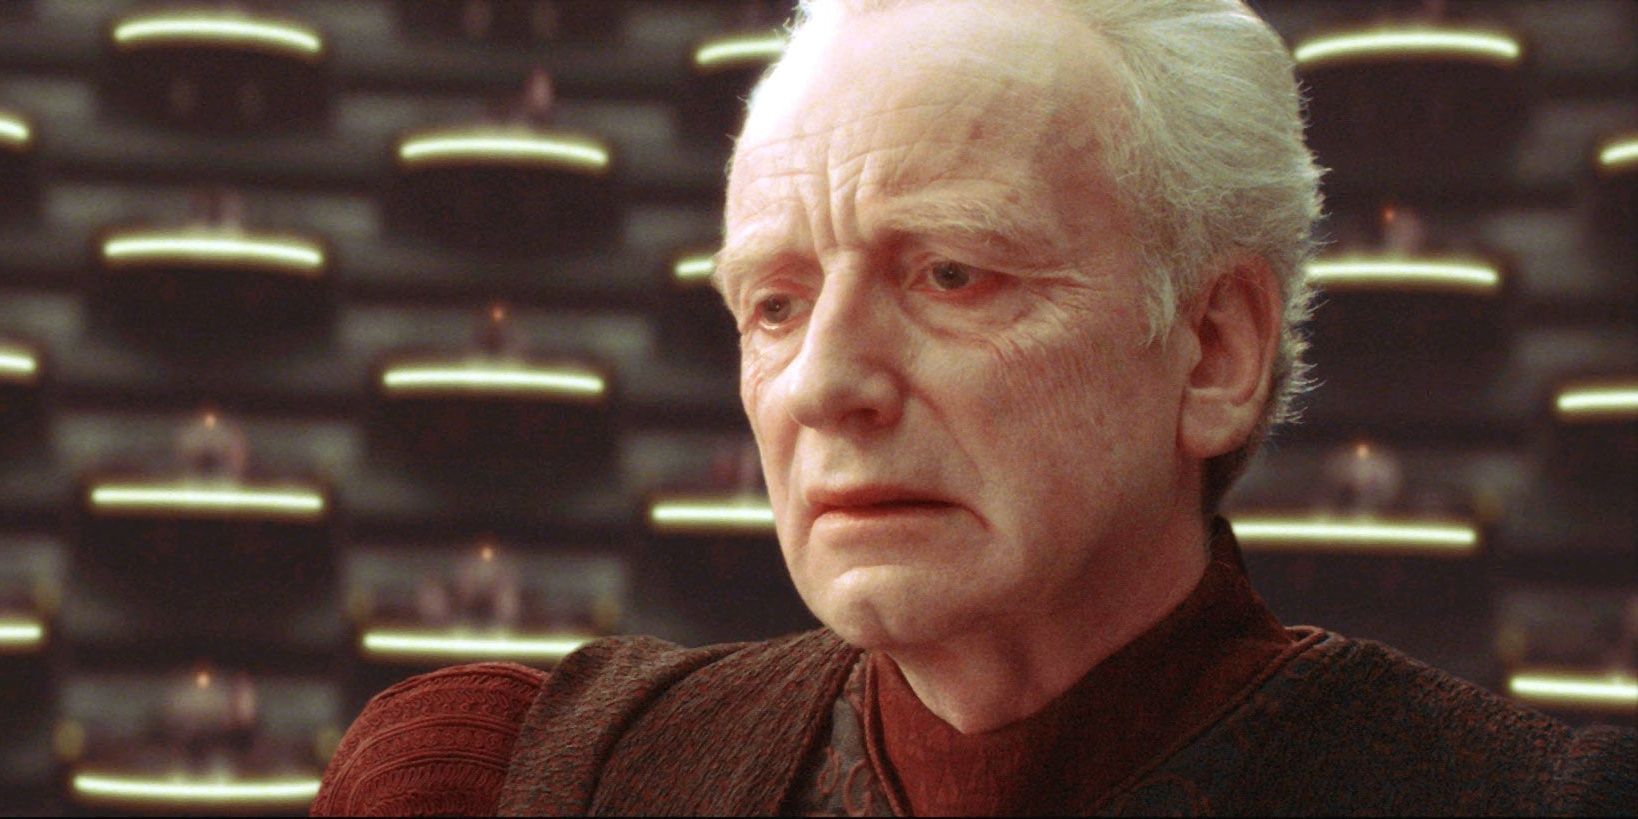 Chancellor Palpatine Revenge of the Sith